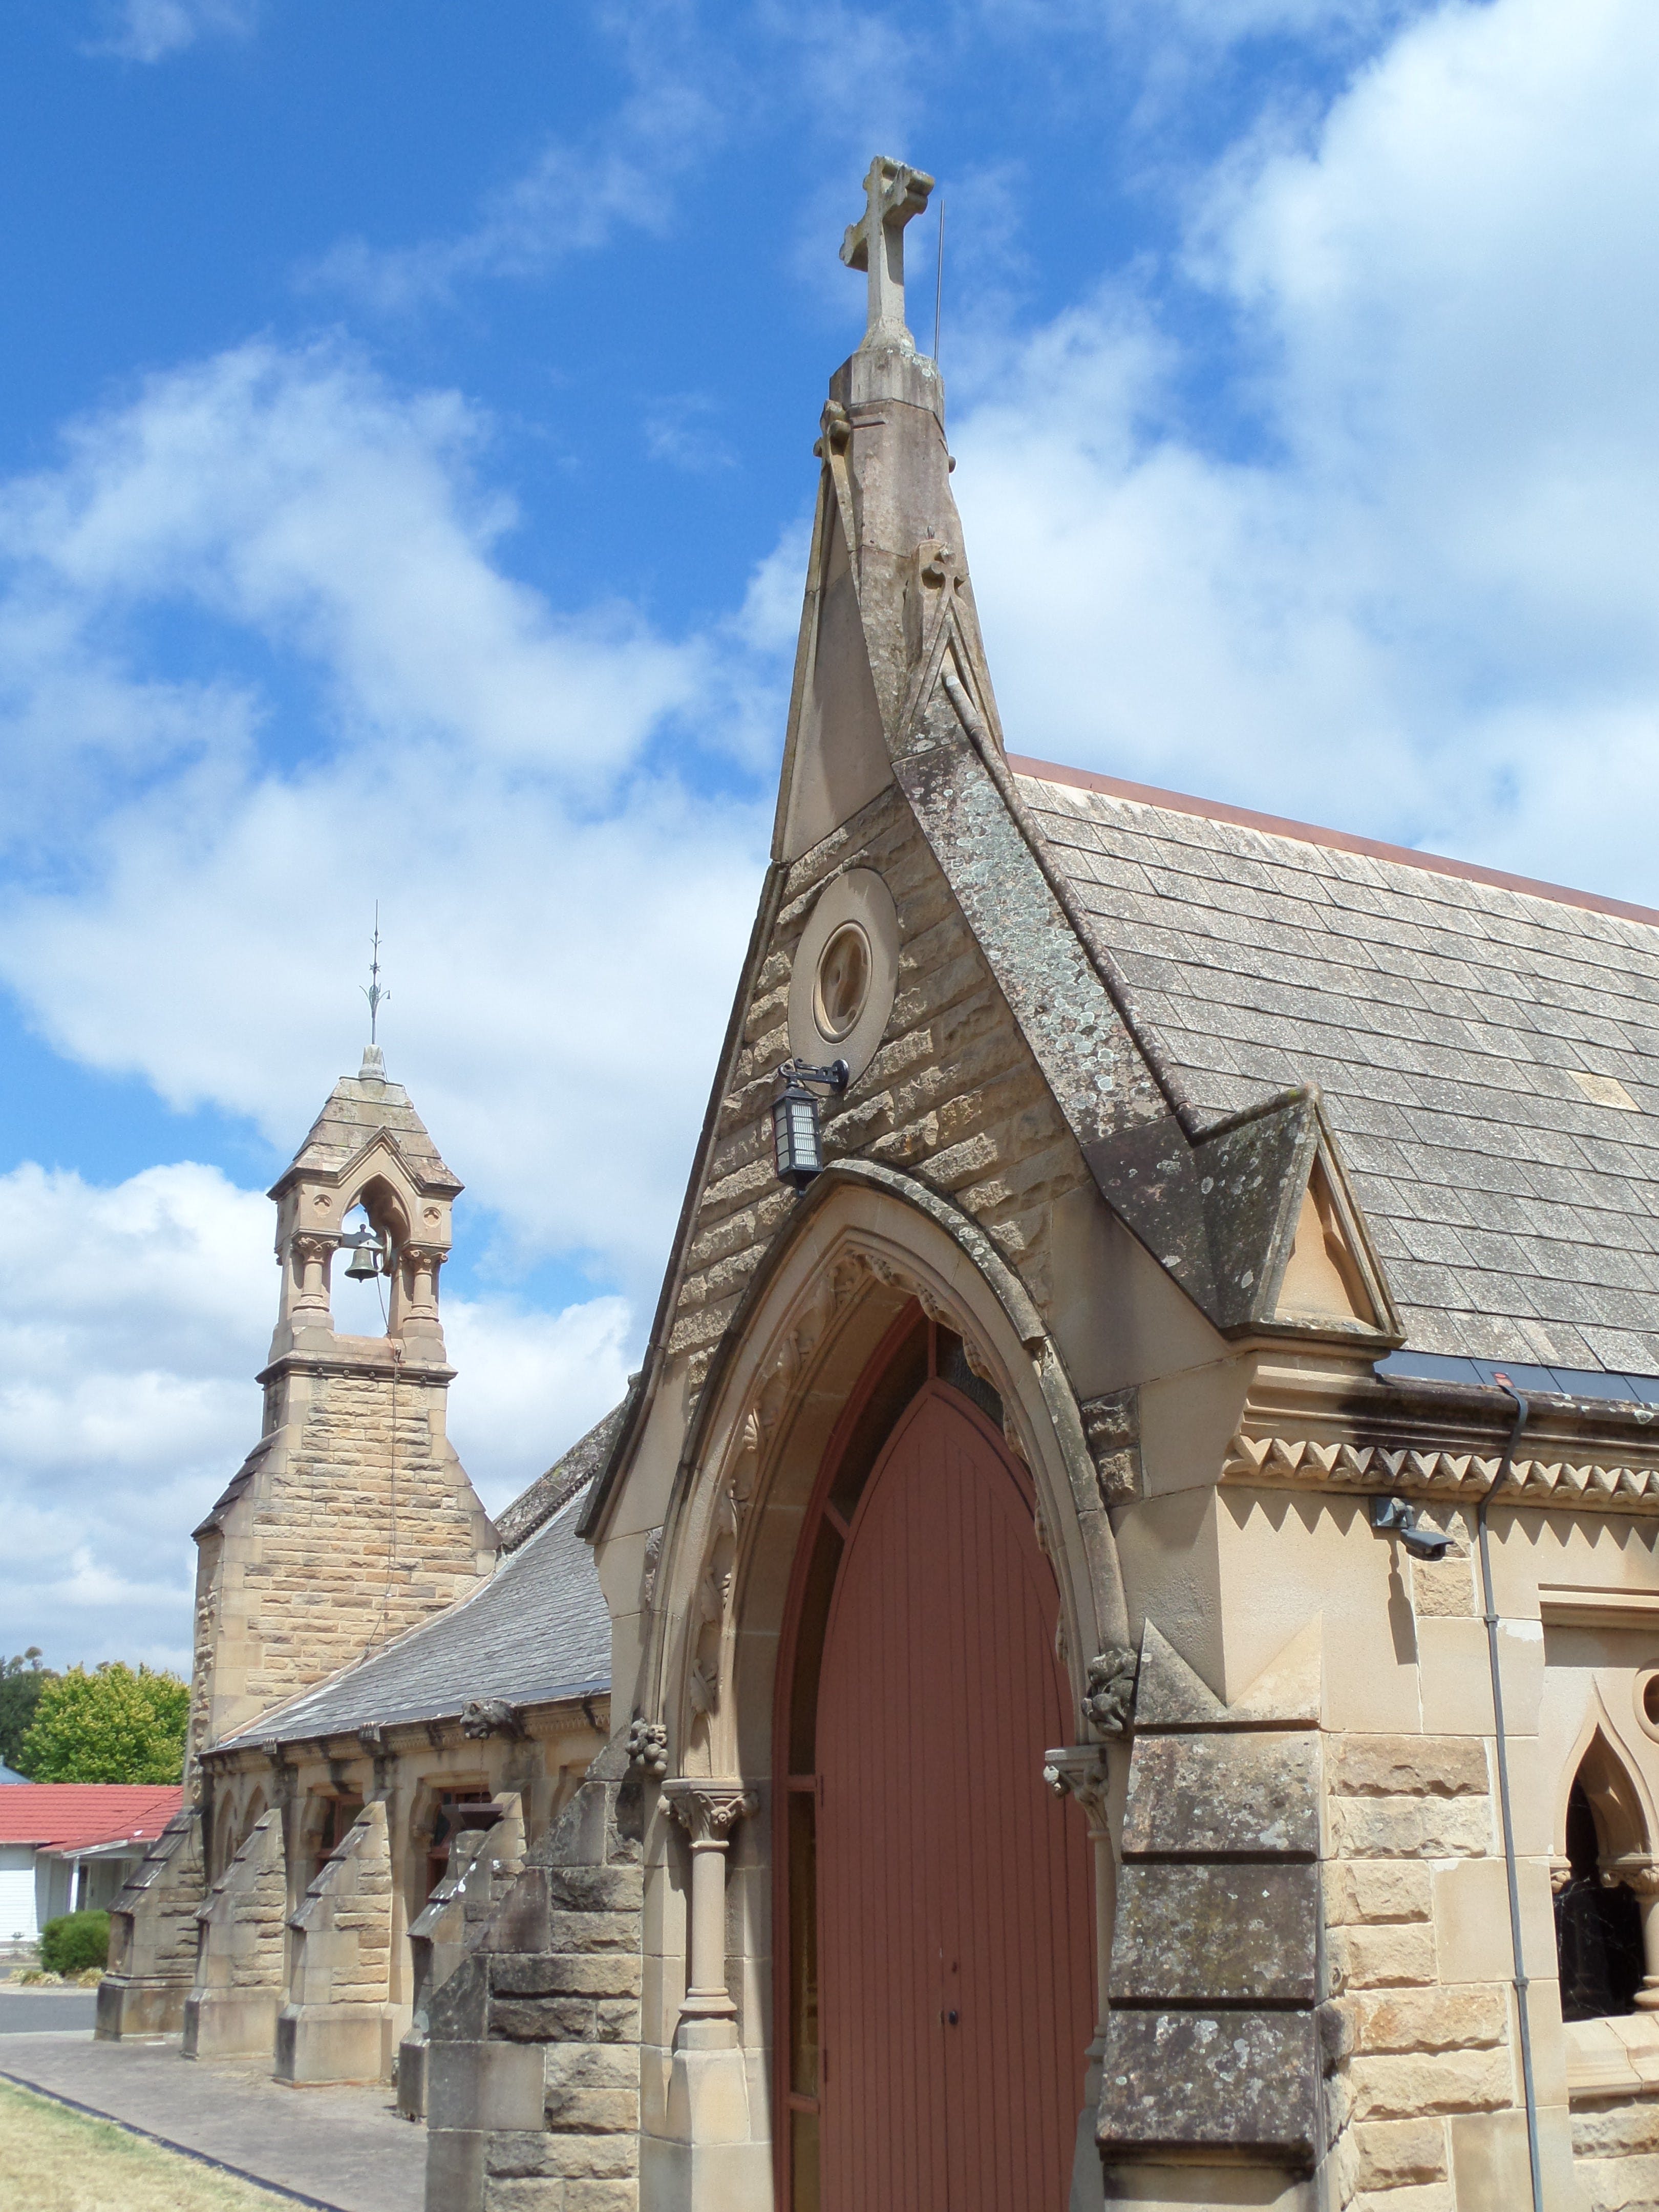 All Saints' Anglican Church - Accommodation Nelson Bay